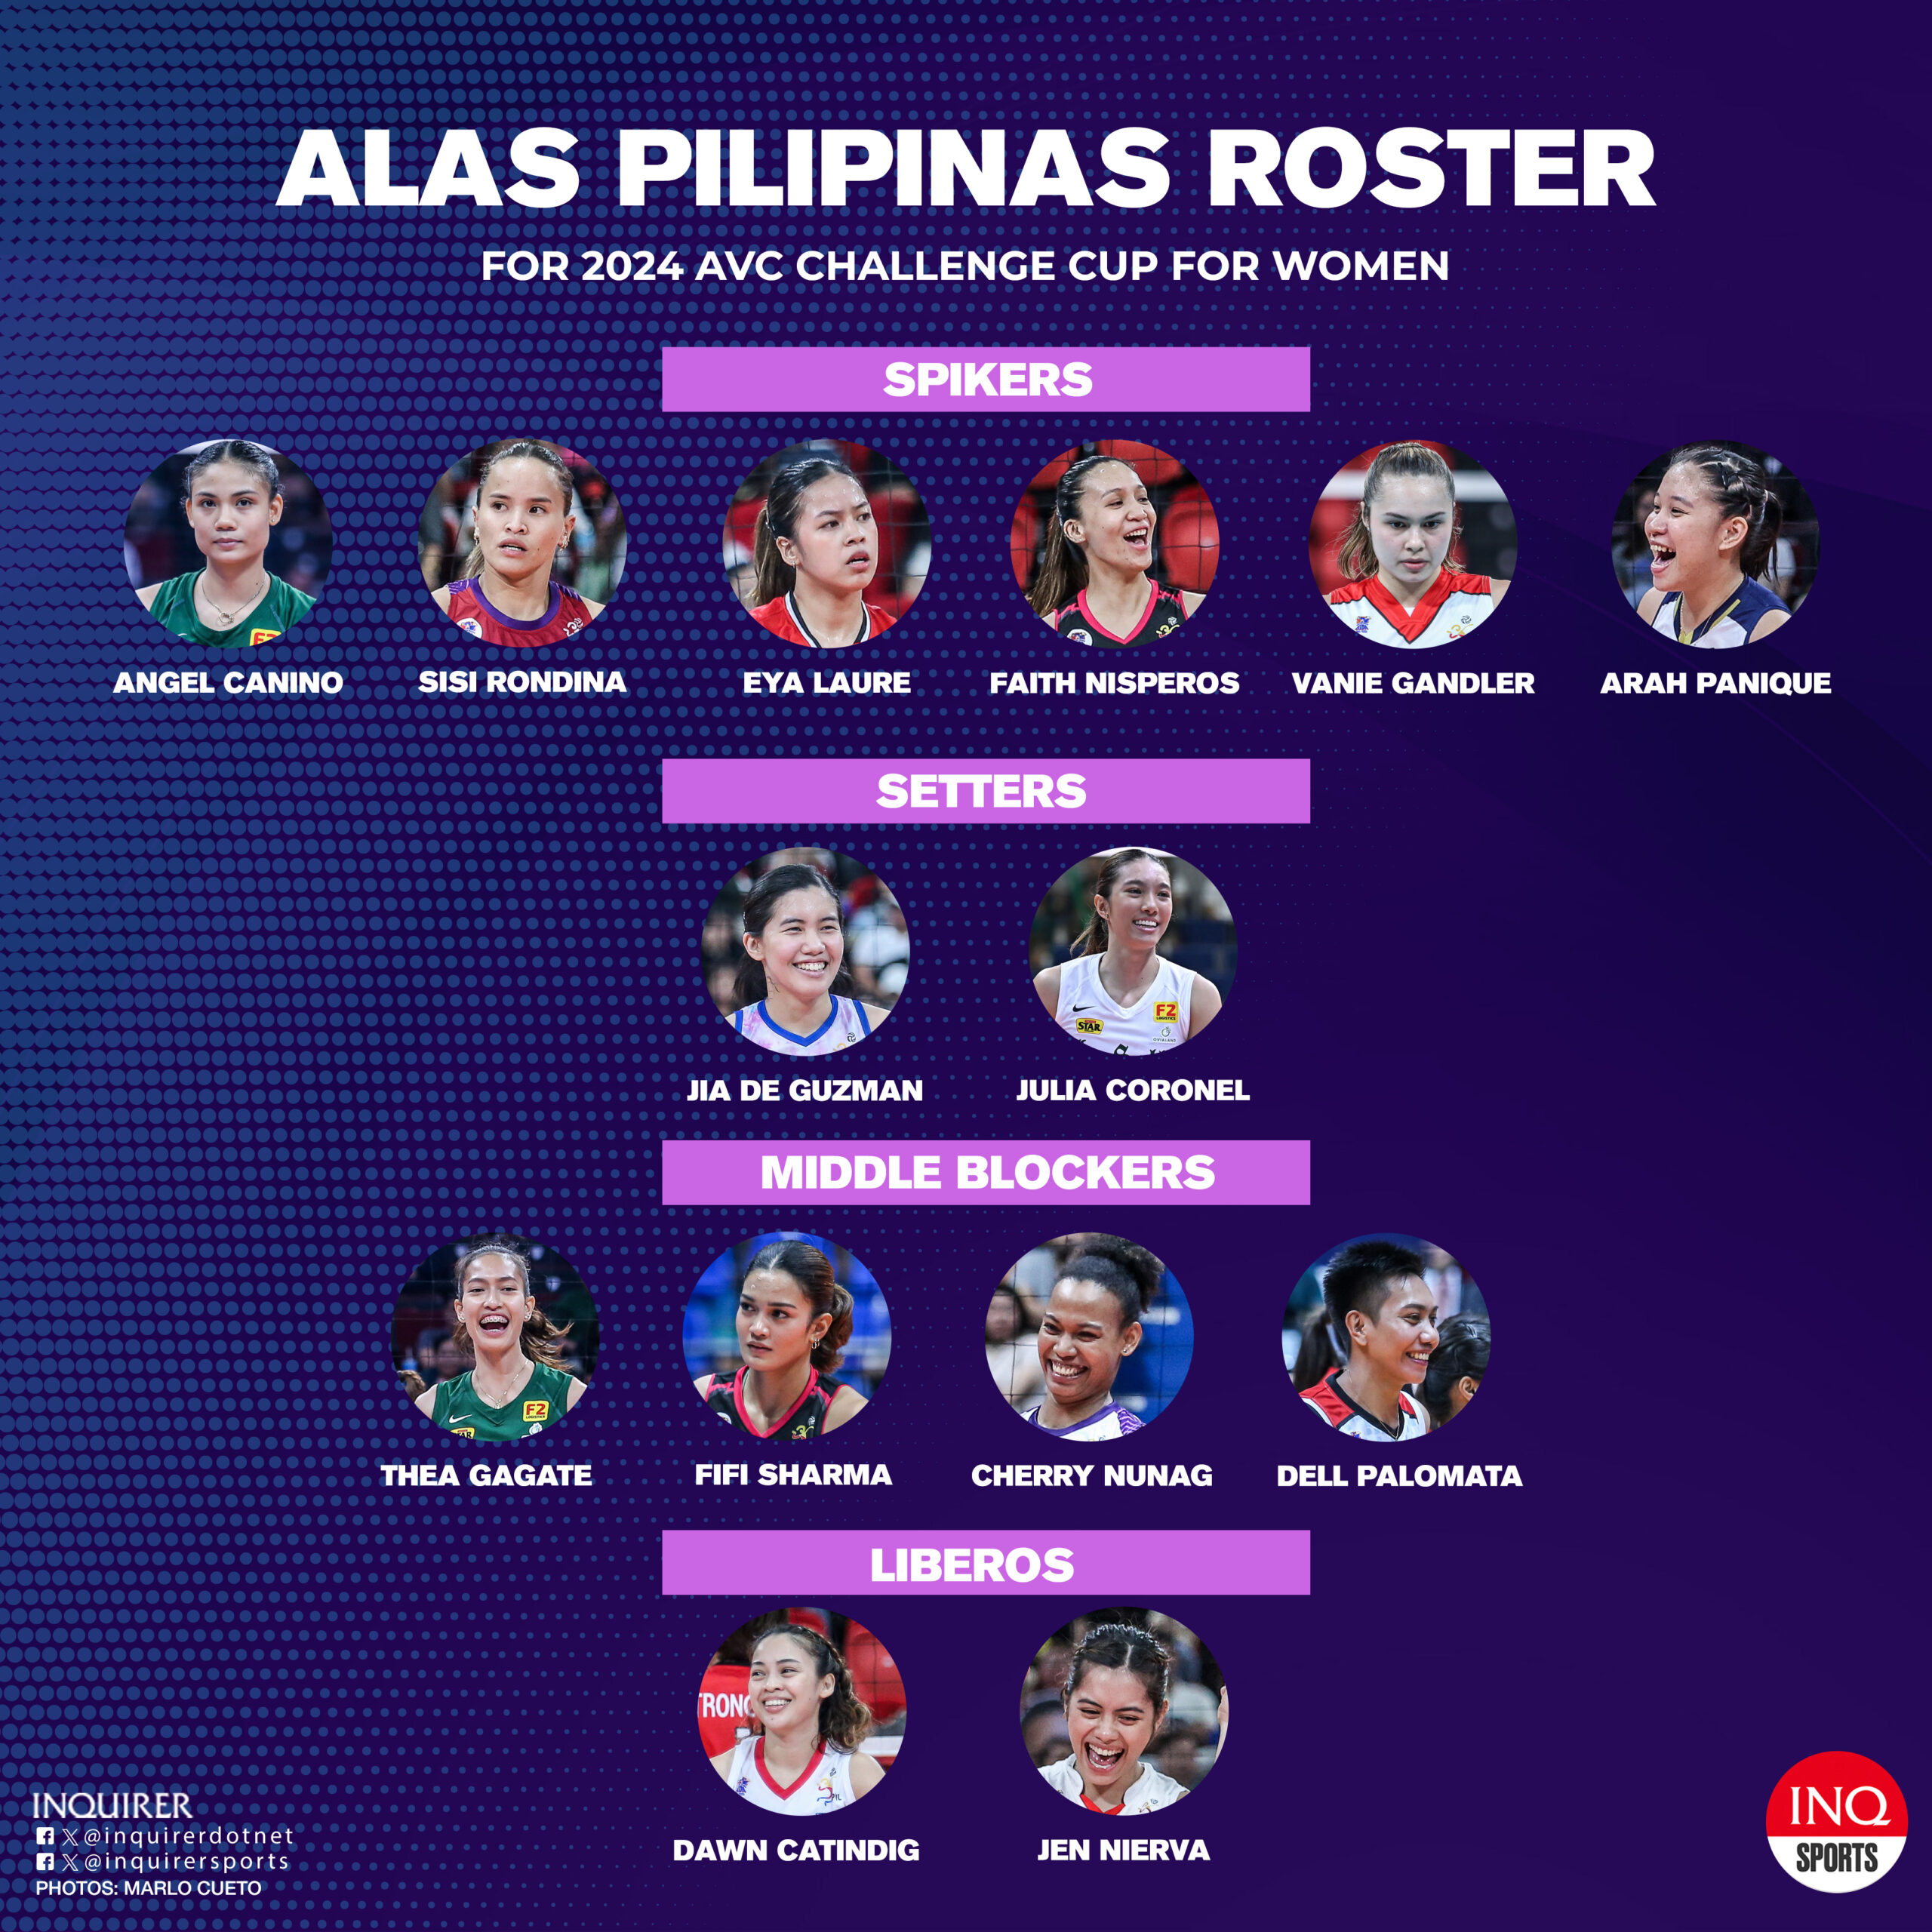 Philippine women's volleyball team roster at the AVC Challenge Cup 2024 Alas Pilipinas